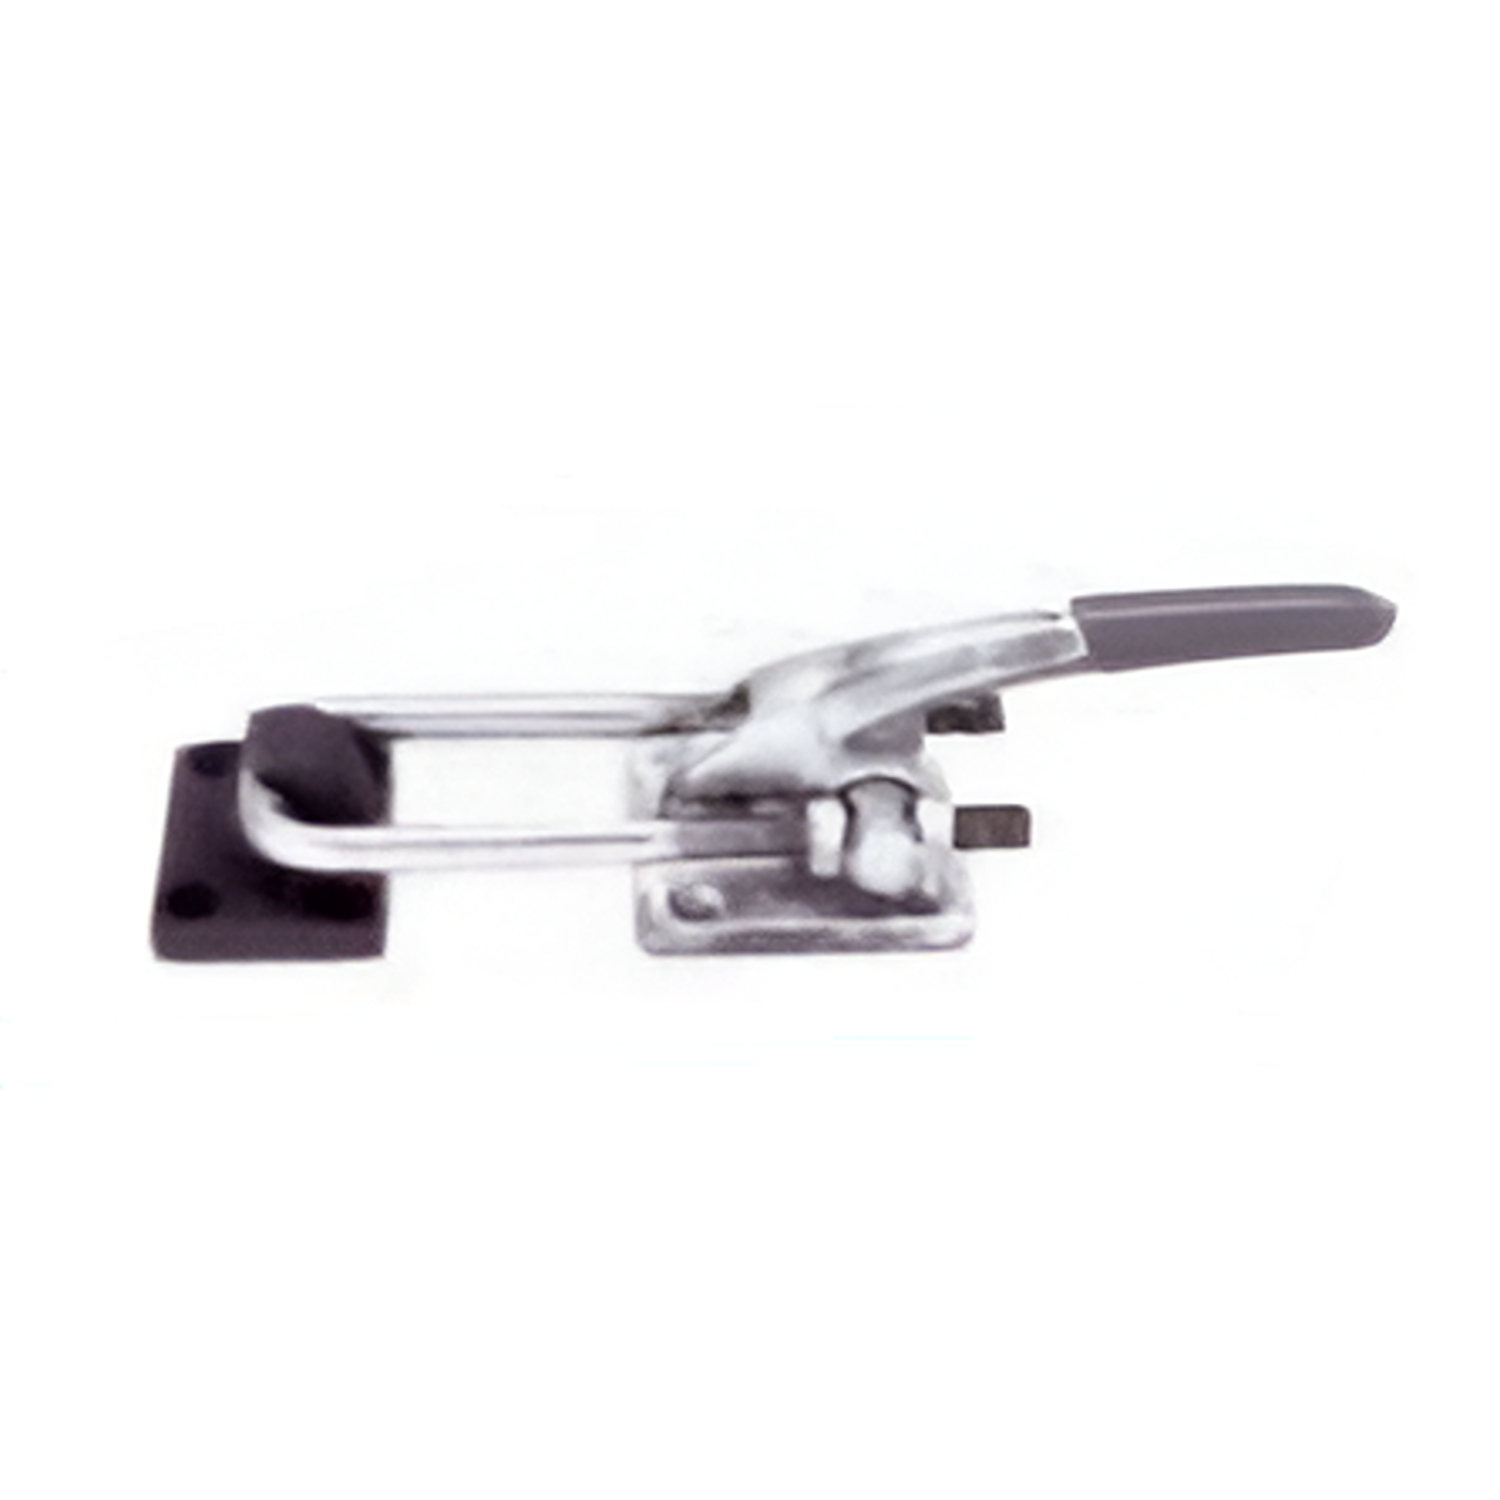 YEW AIK AH02700 GH40380 Latch Toggle Clamp - Premium Toggle Clamp from YEW AIK - Shop now at Yew Aik.